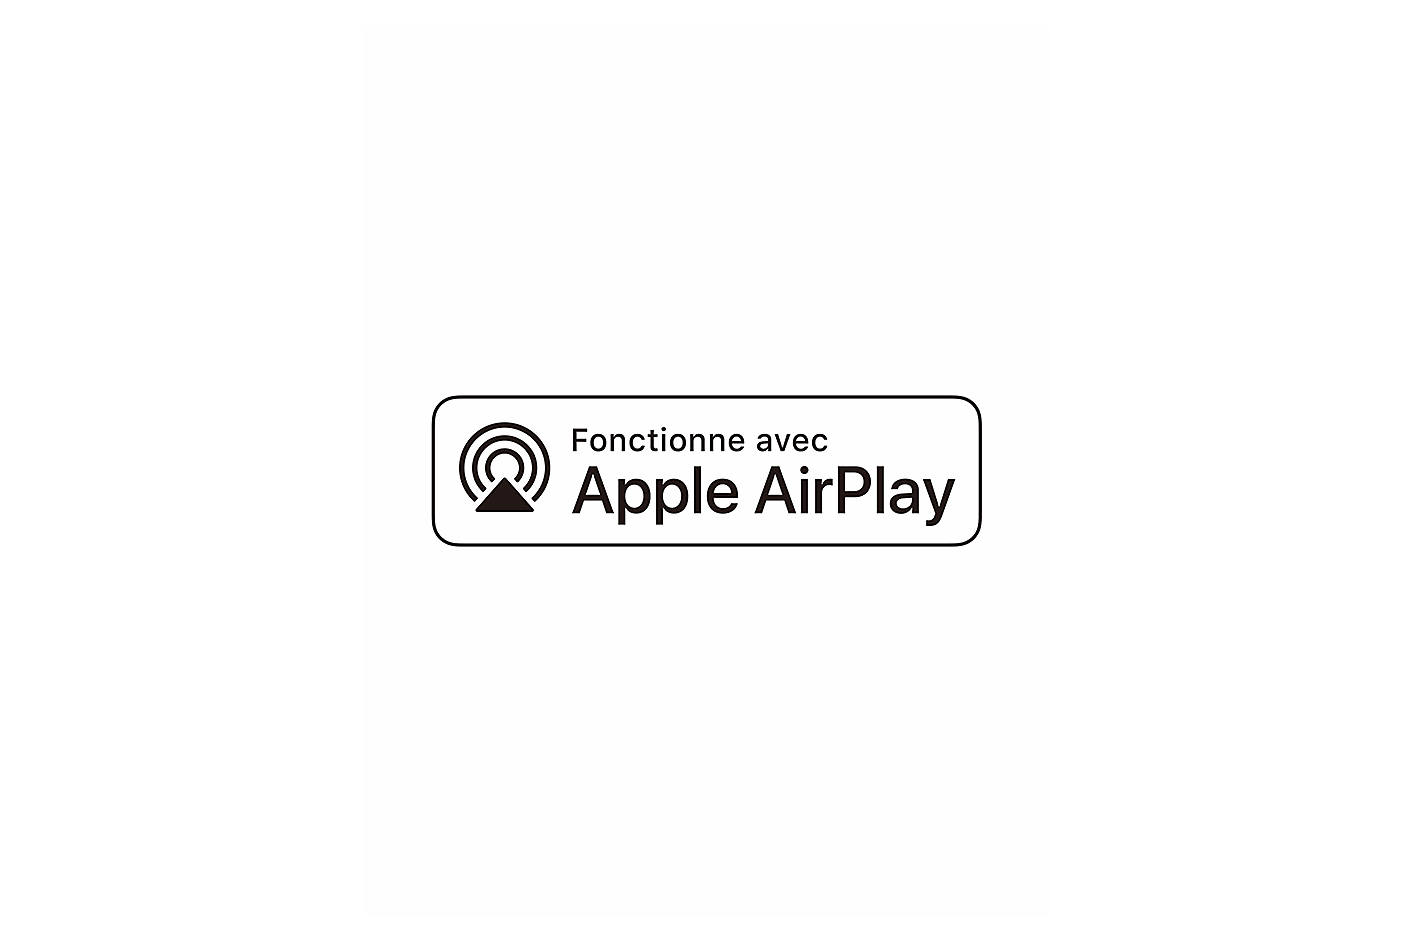 Image of a Apple AirPlay logo